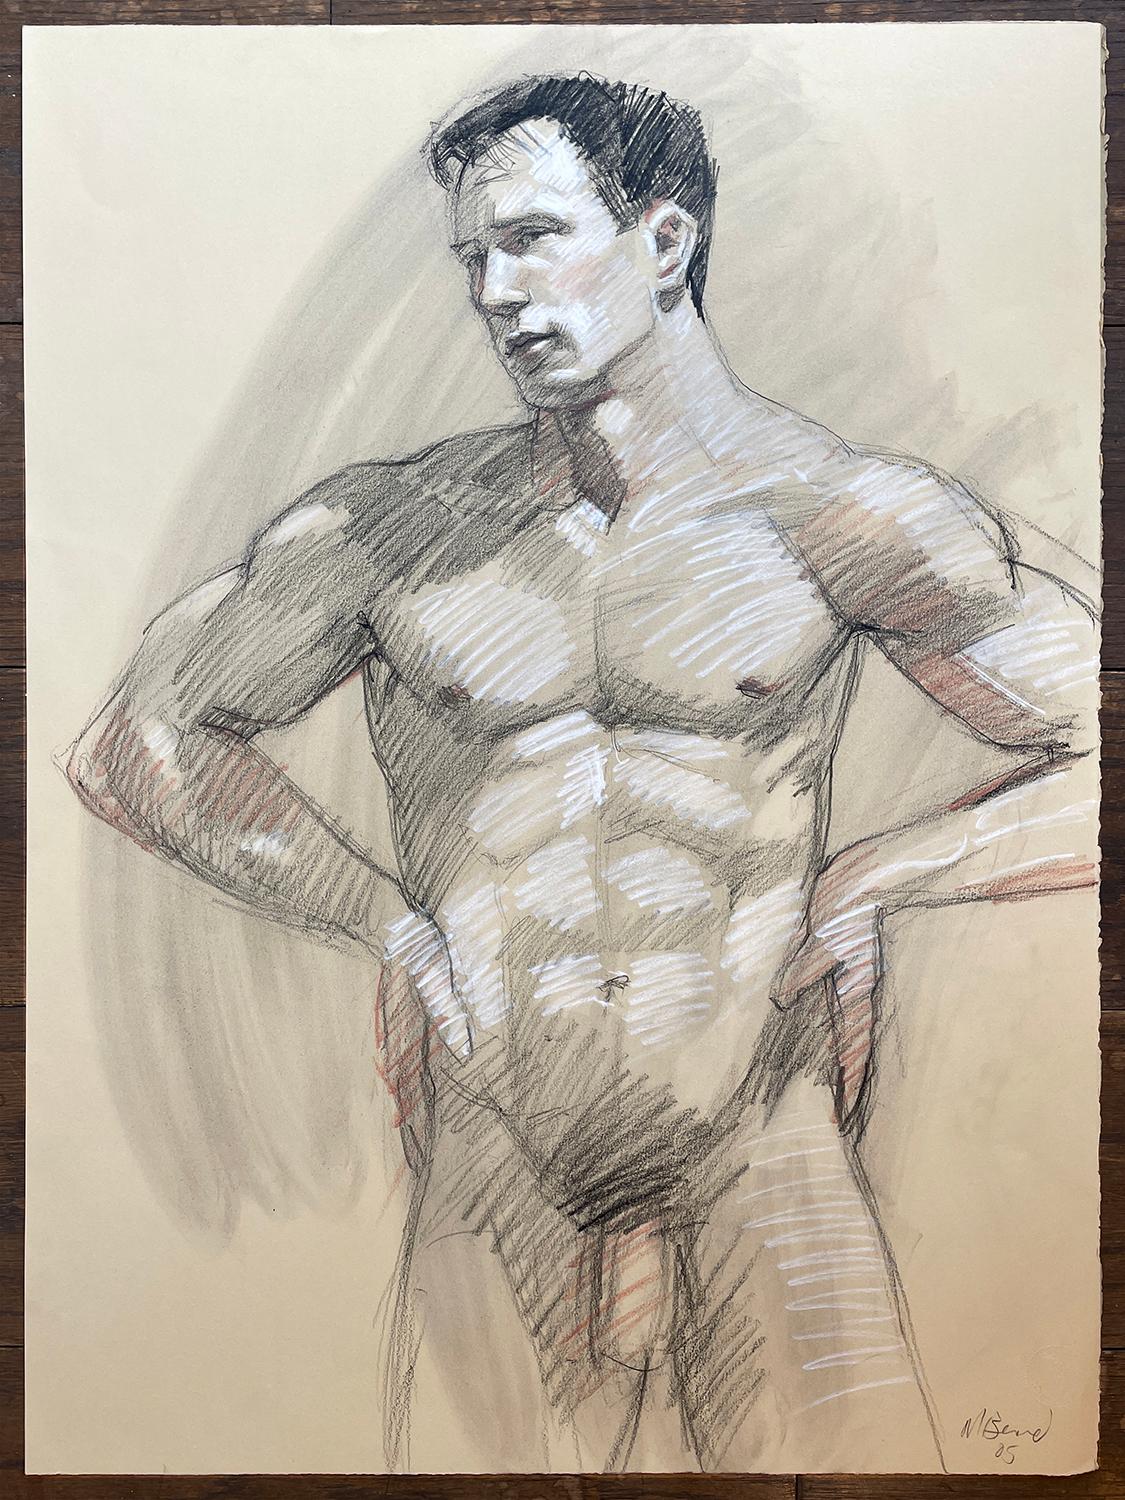 Academic life drawing of a male nude with charcoal and graphite by Mark Beard, "MB 079"
graphite, Conte crayon and charcoal on Arches paper
30 x 22 inches unframed
Signed, lower right

Contemporary figurative life study drawing of a male nude in